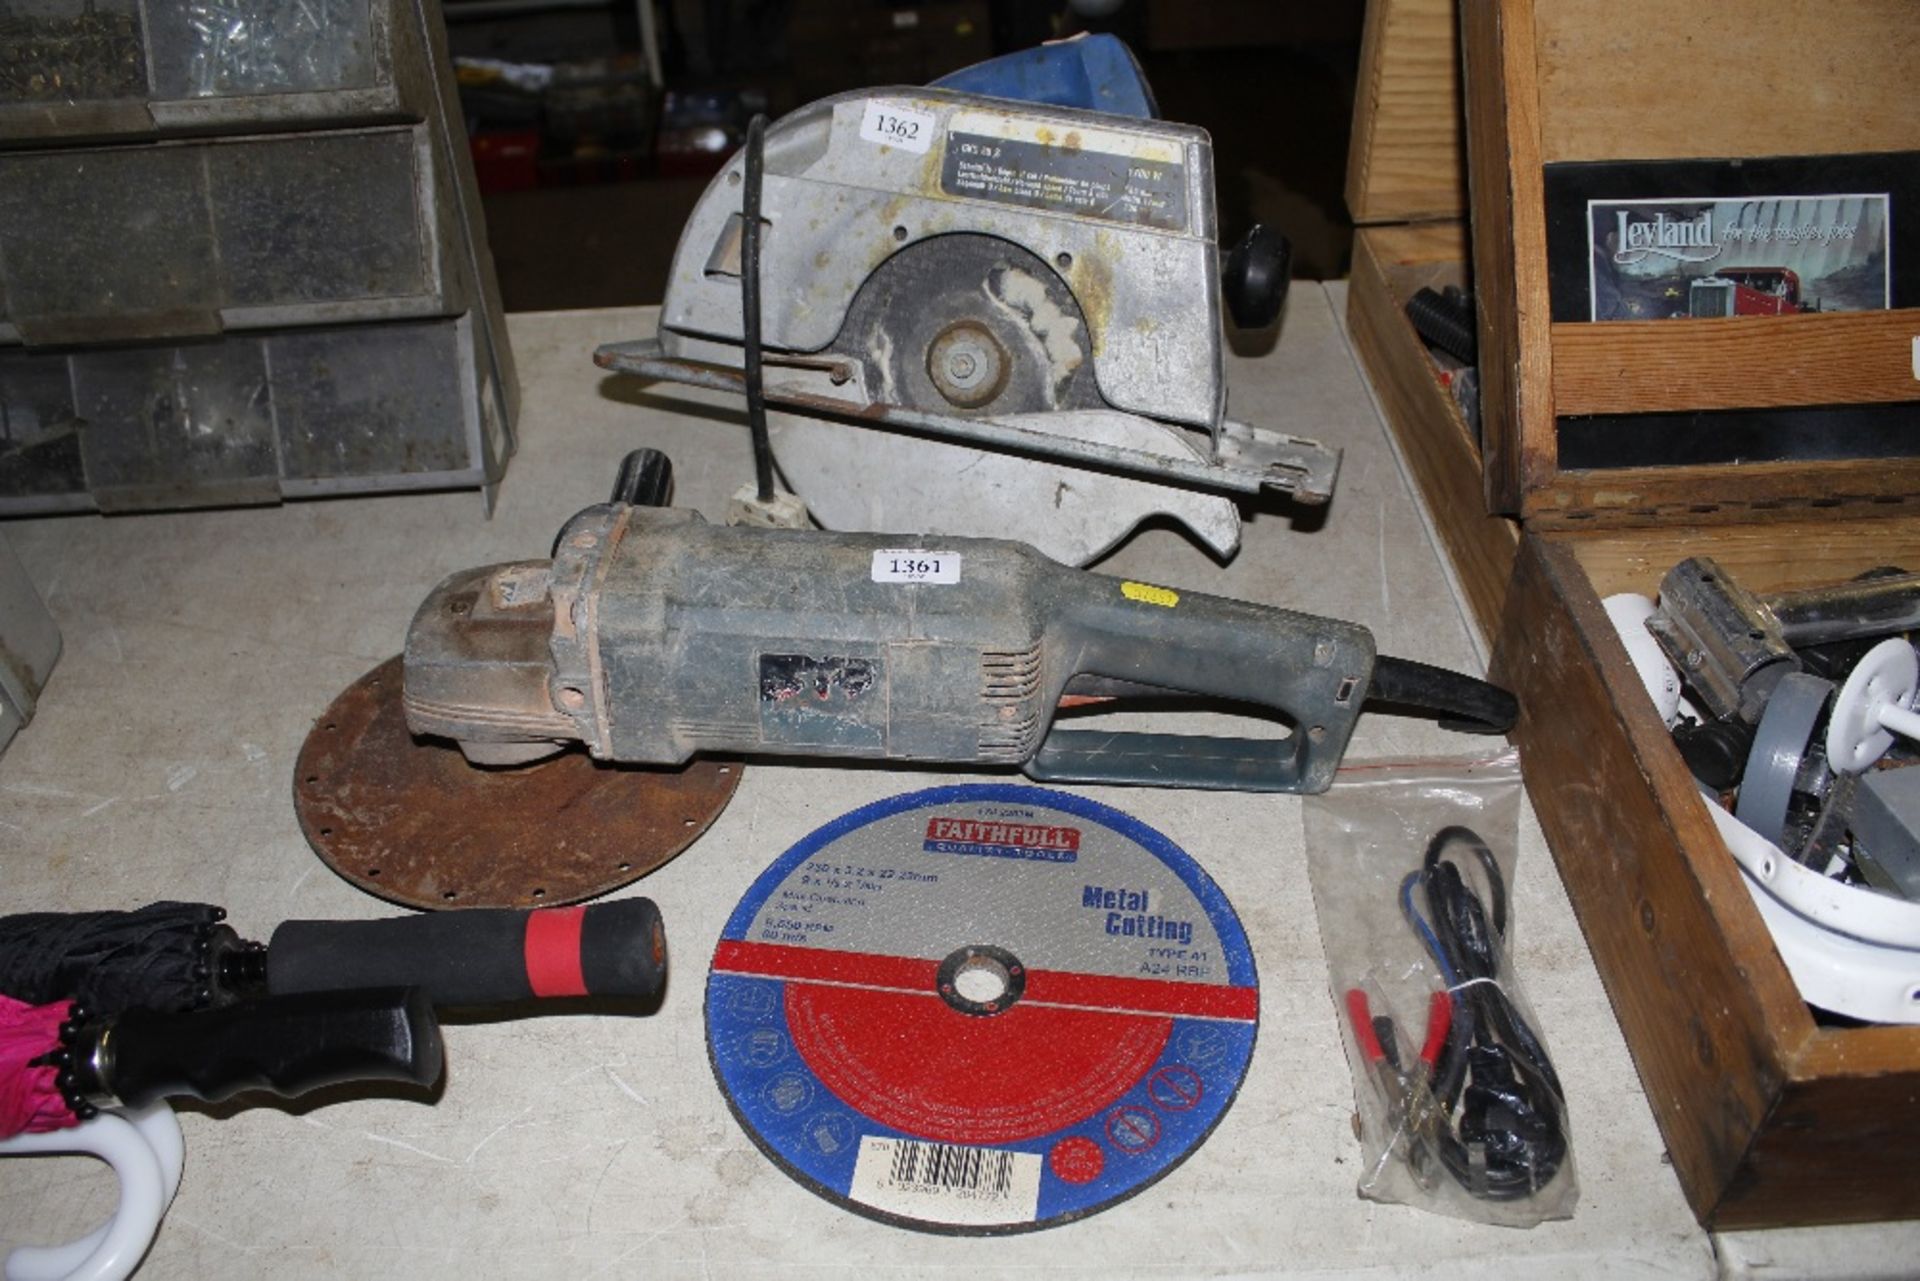 A Proline disc cutter lacking lead, together with